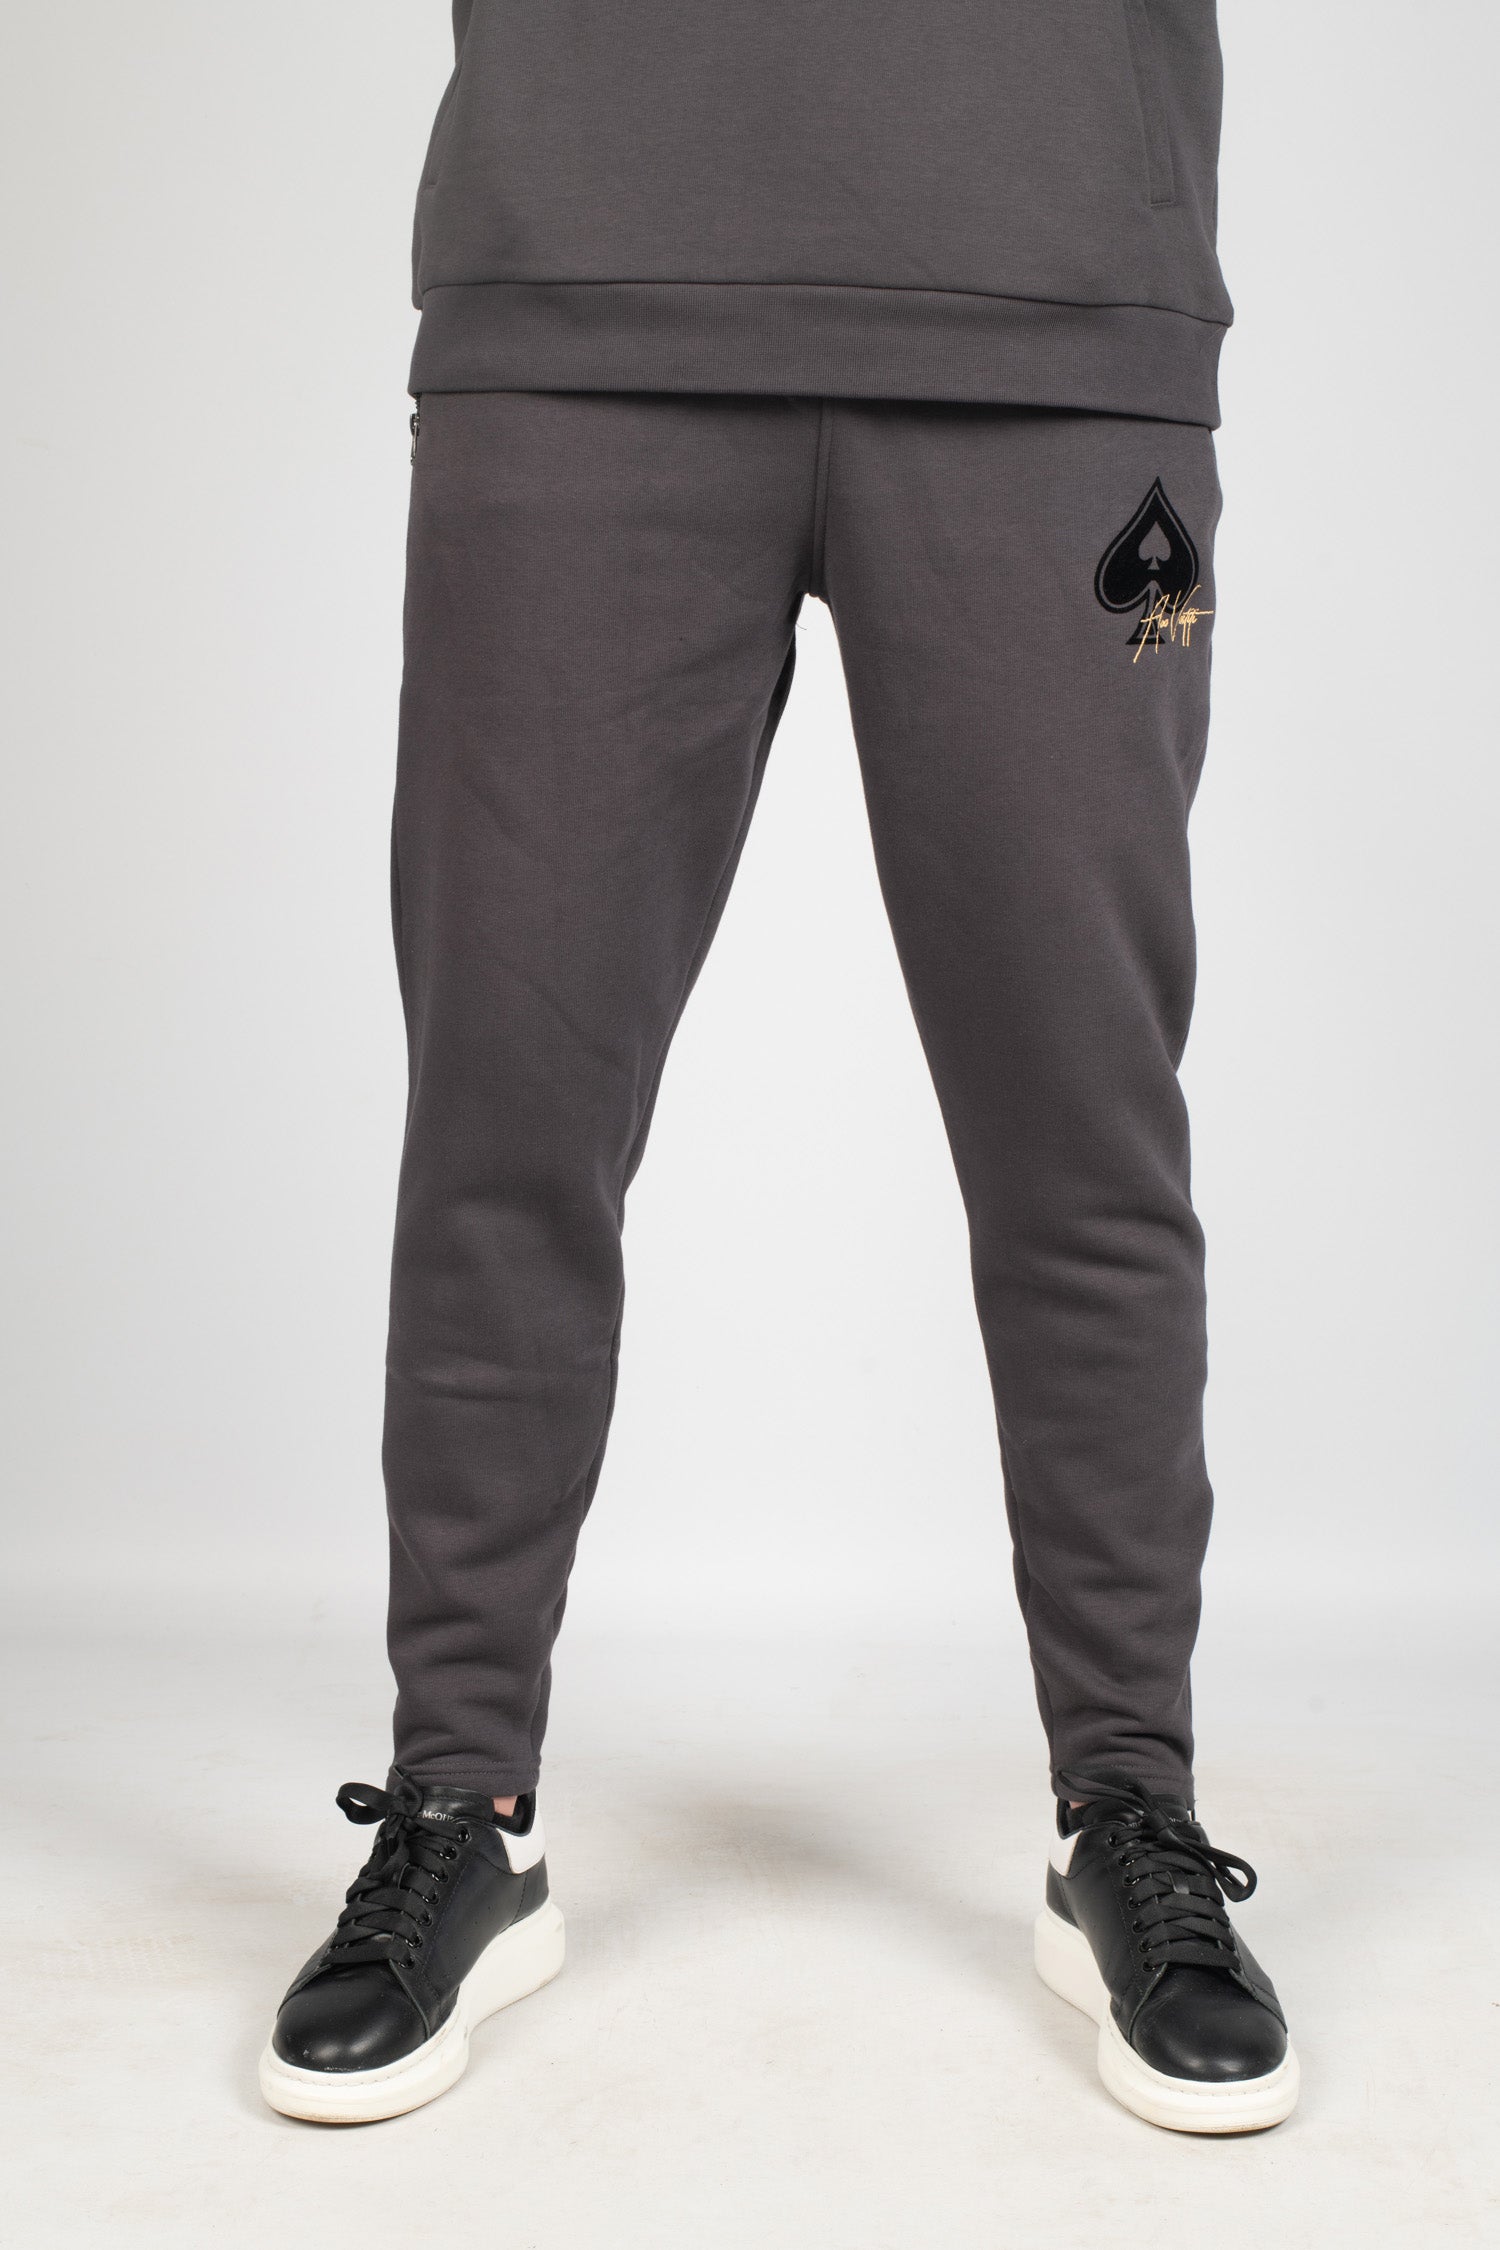 Ace Flock Spade Fitted Jogger Magnet Grey